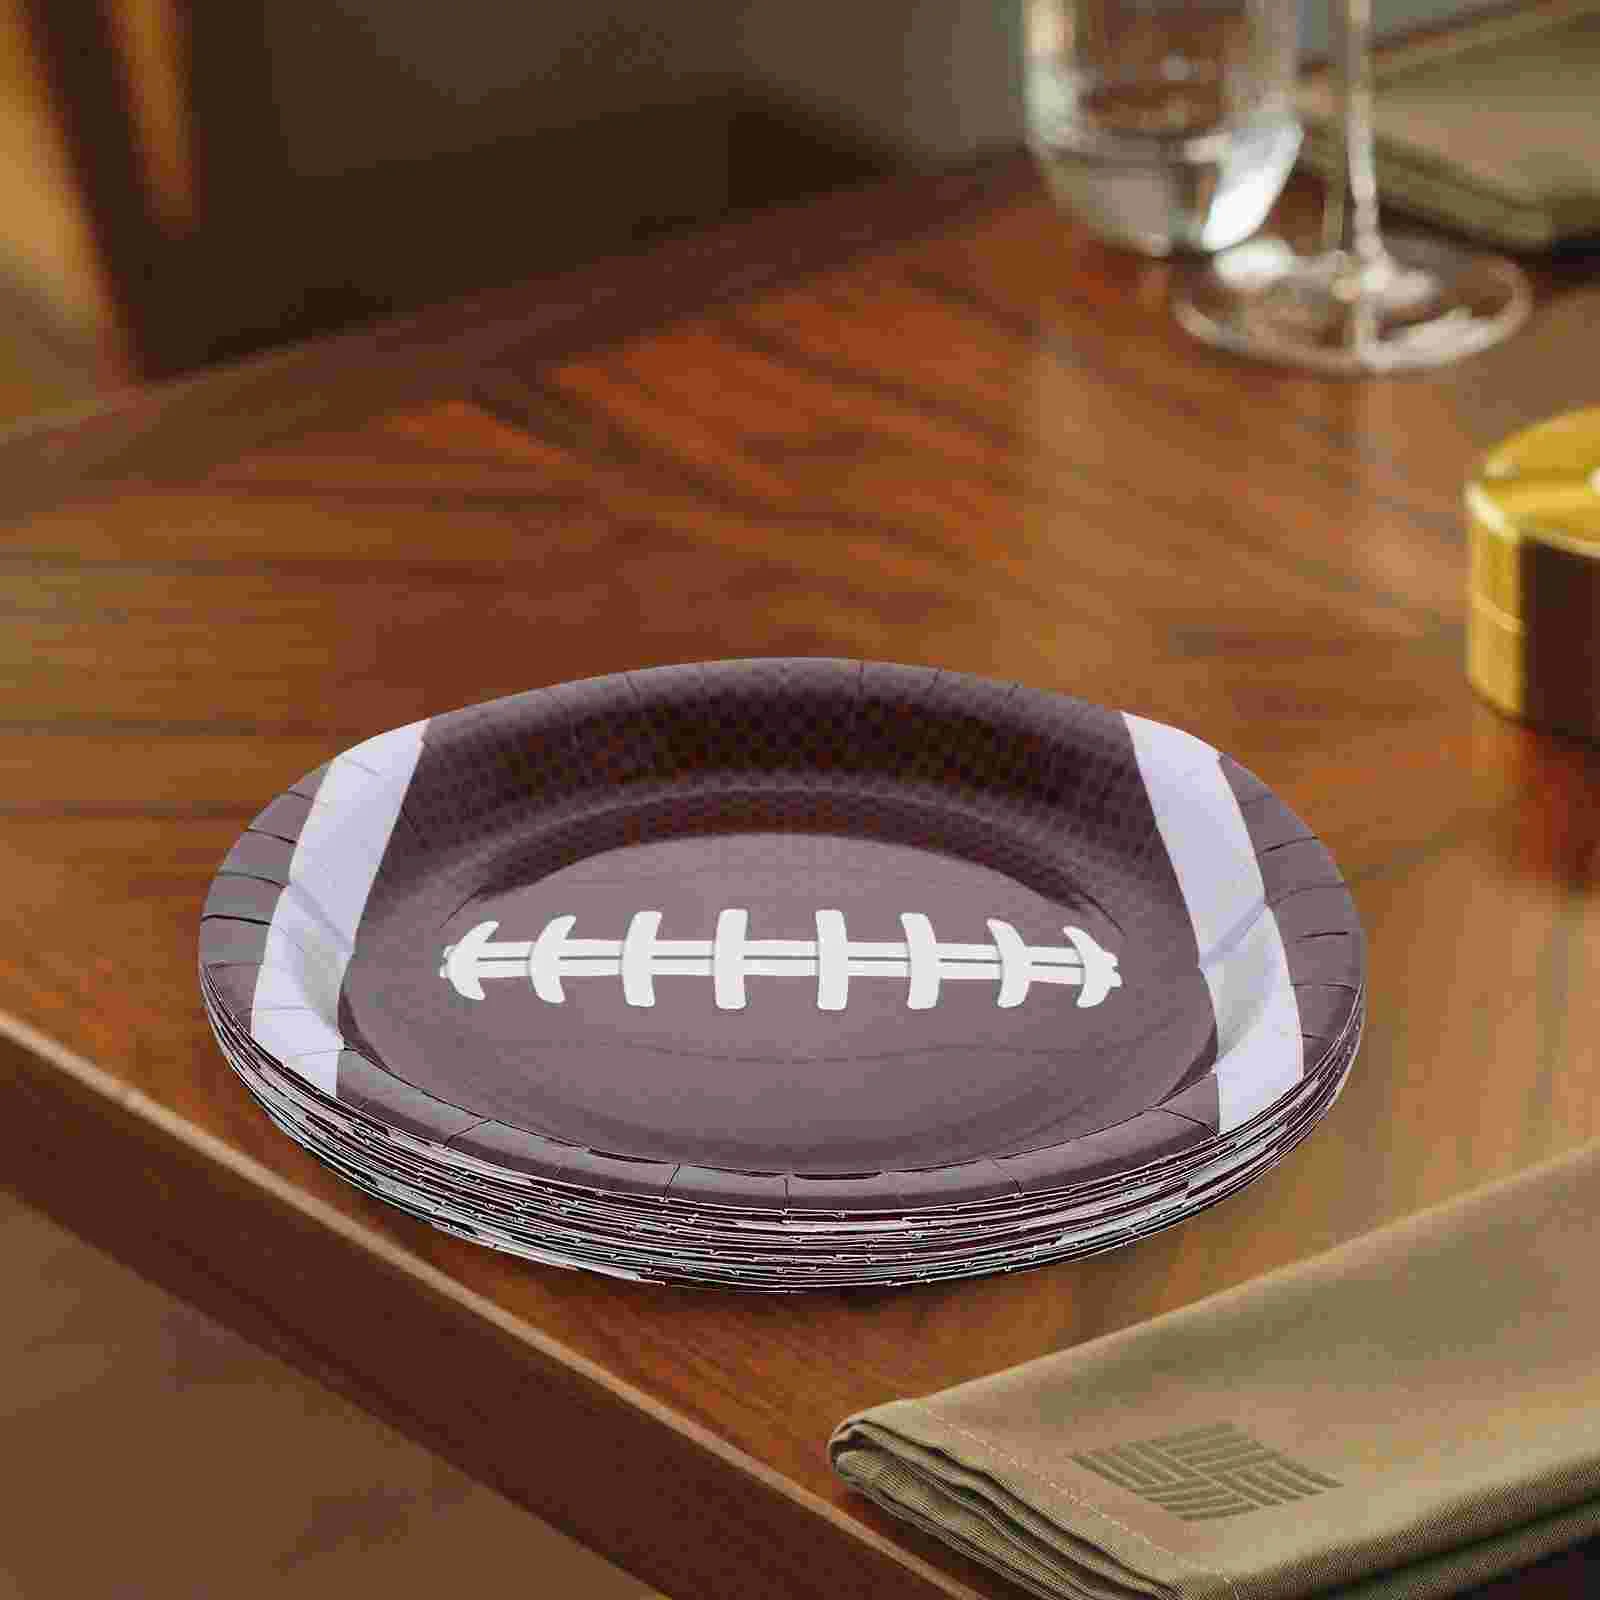 

Disposable Party Dinnerware Birthday Rugby Themed Napkins Ornaments Creative Paper Plates Pattern Cups Cutlery